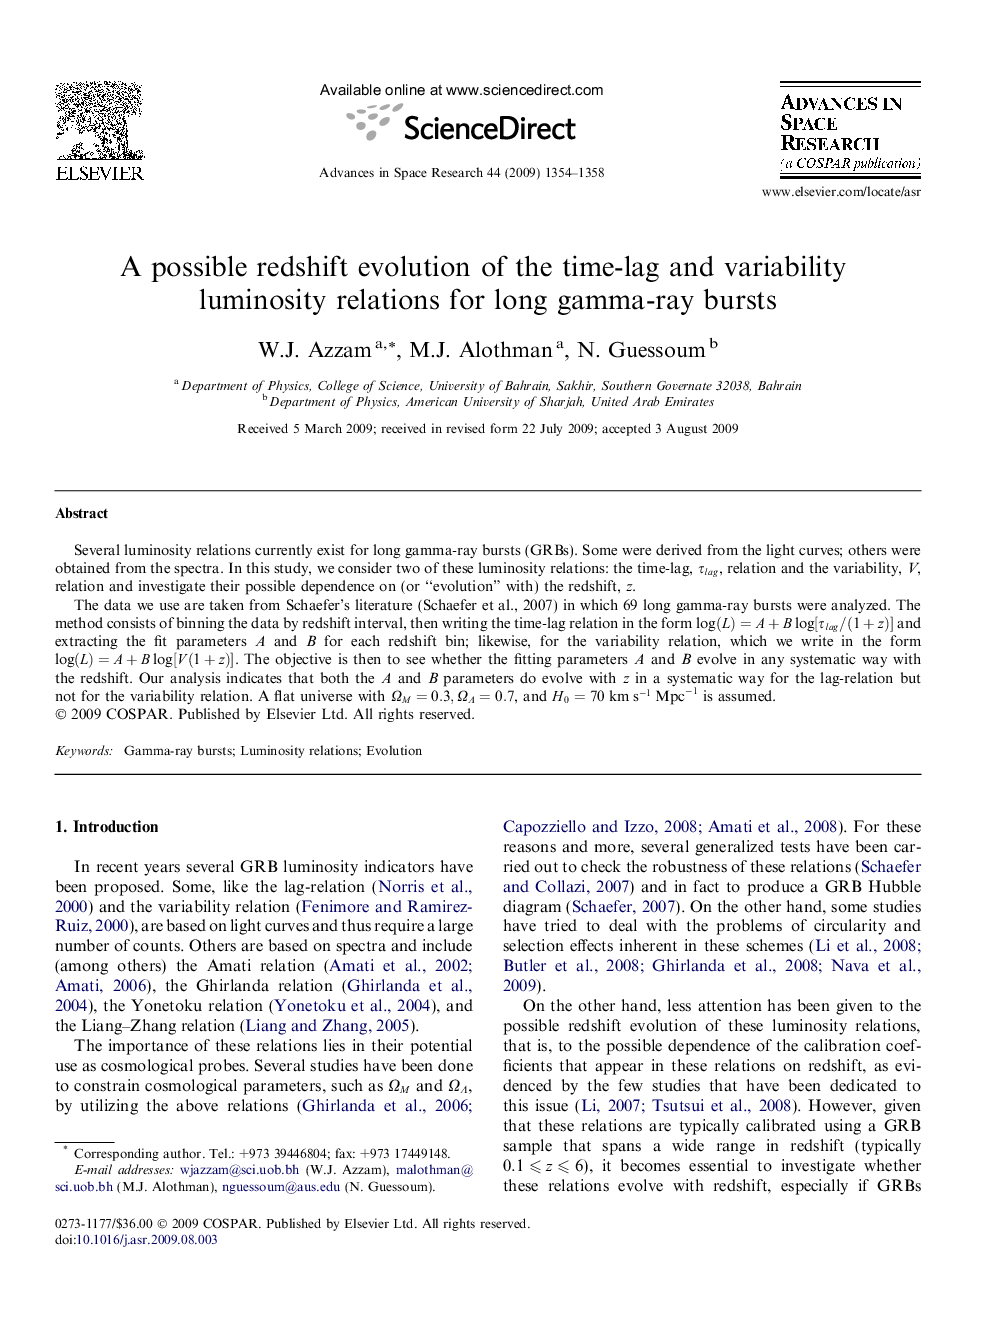 A possible redshift evolution of the time-lag and variability luminosity relations for long gamma-ray bursts